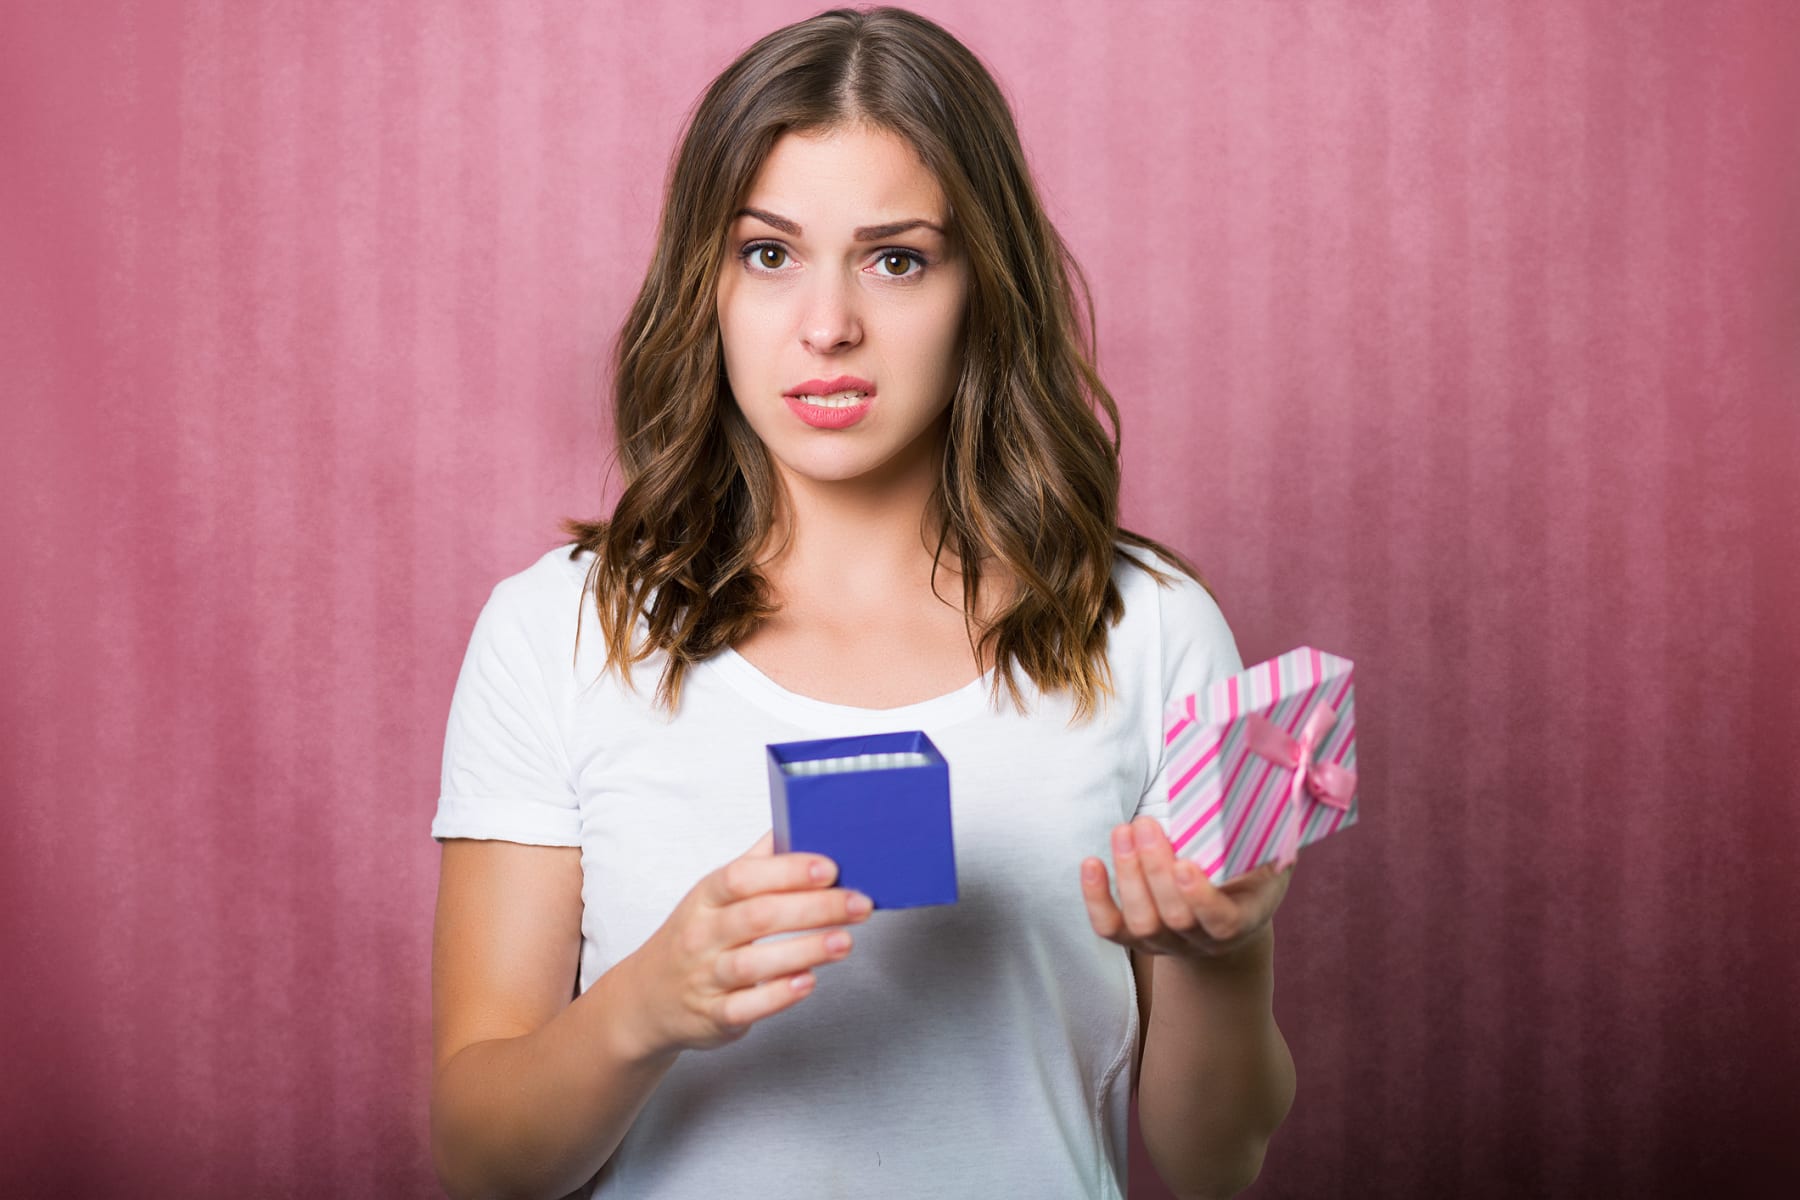 Woman disappointed with gift she's holding.